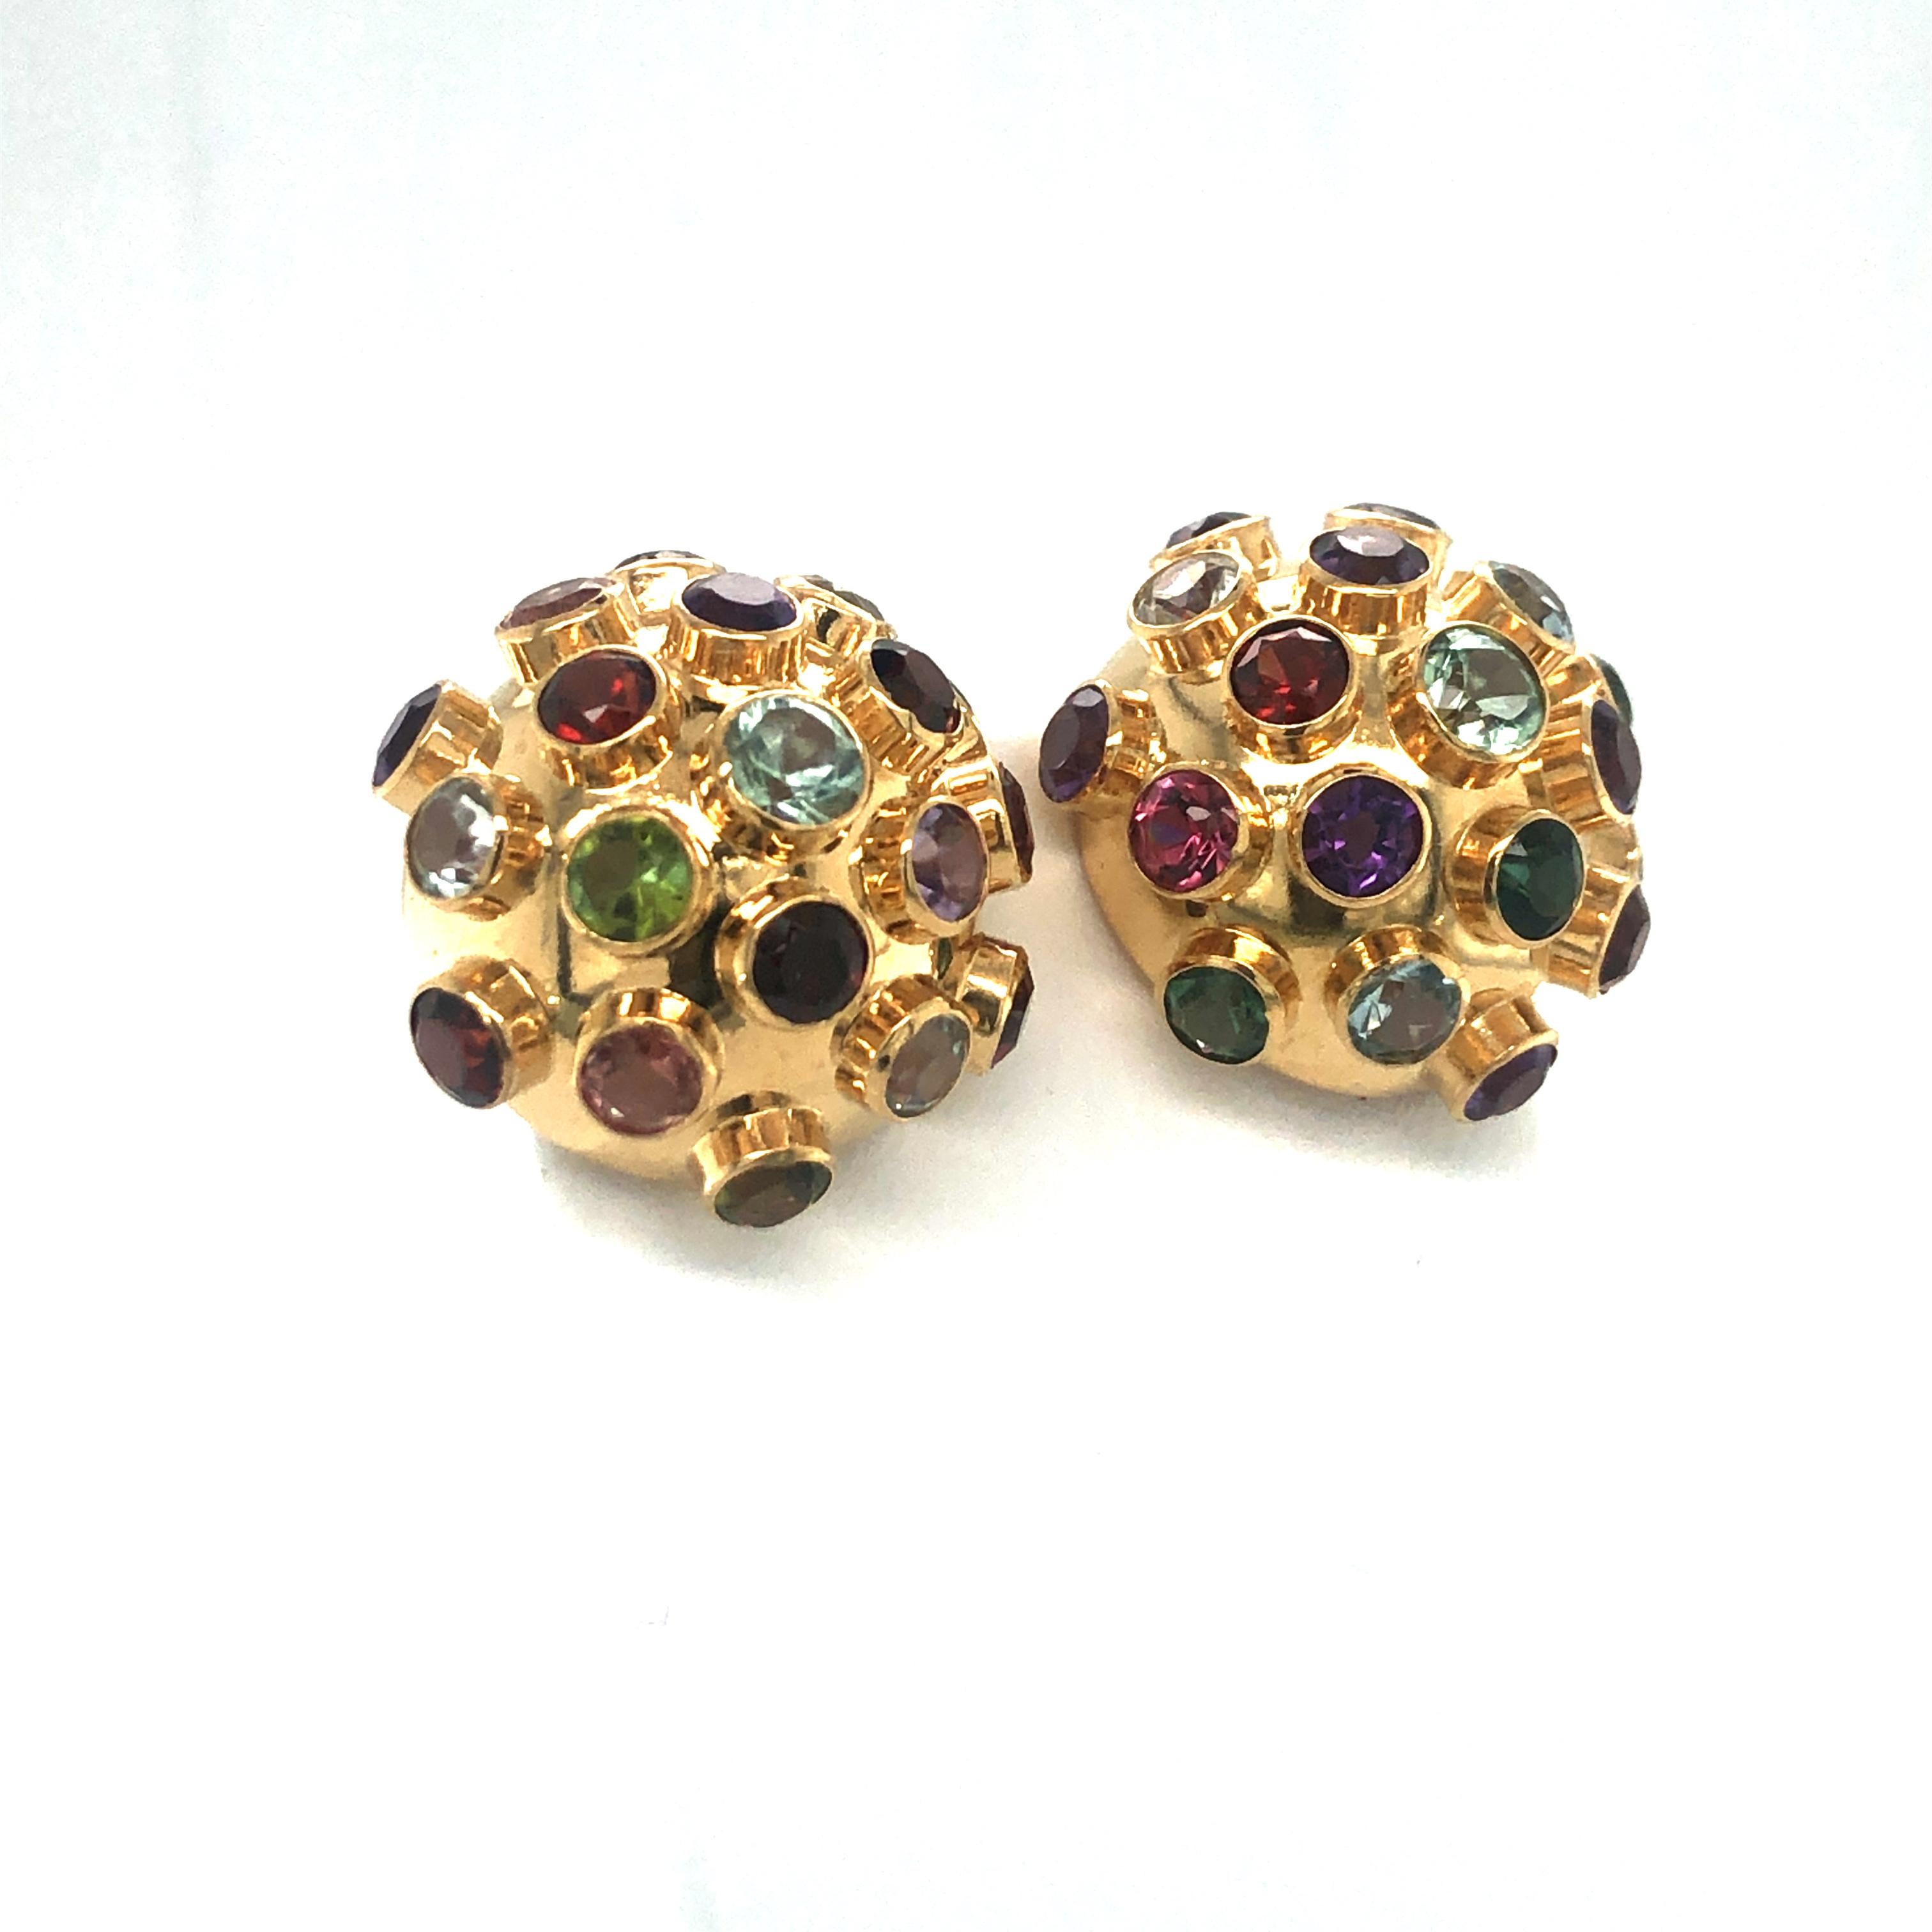 These playful sputnik style earclips were designed by famous Brazilian jeweller H. Stern in the 1950s. They are crafted in 18 karat yellow gold and set with a total of 38 different brilliant-cut coloured gemstones (tourmaline, aquamarine, garnet,